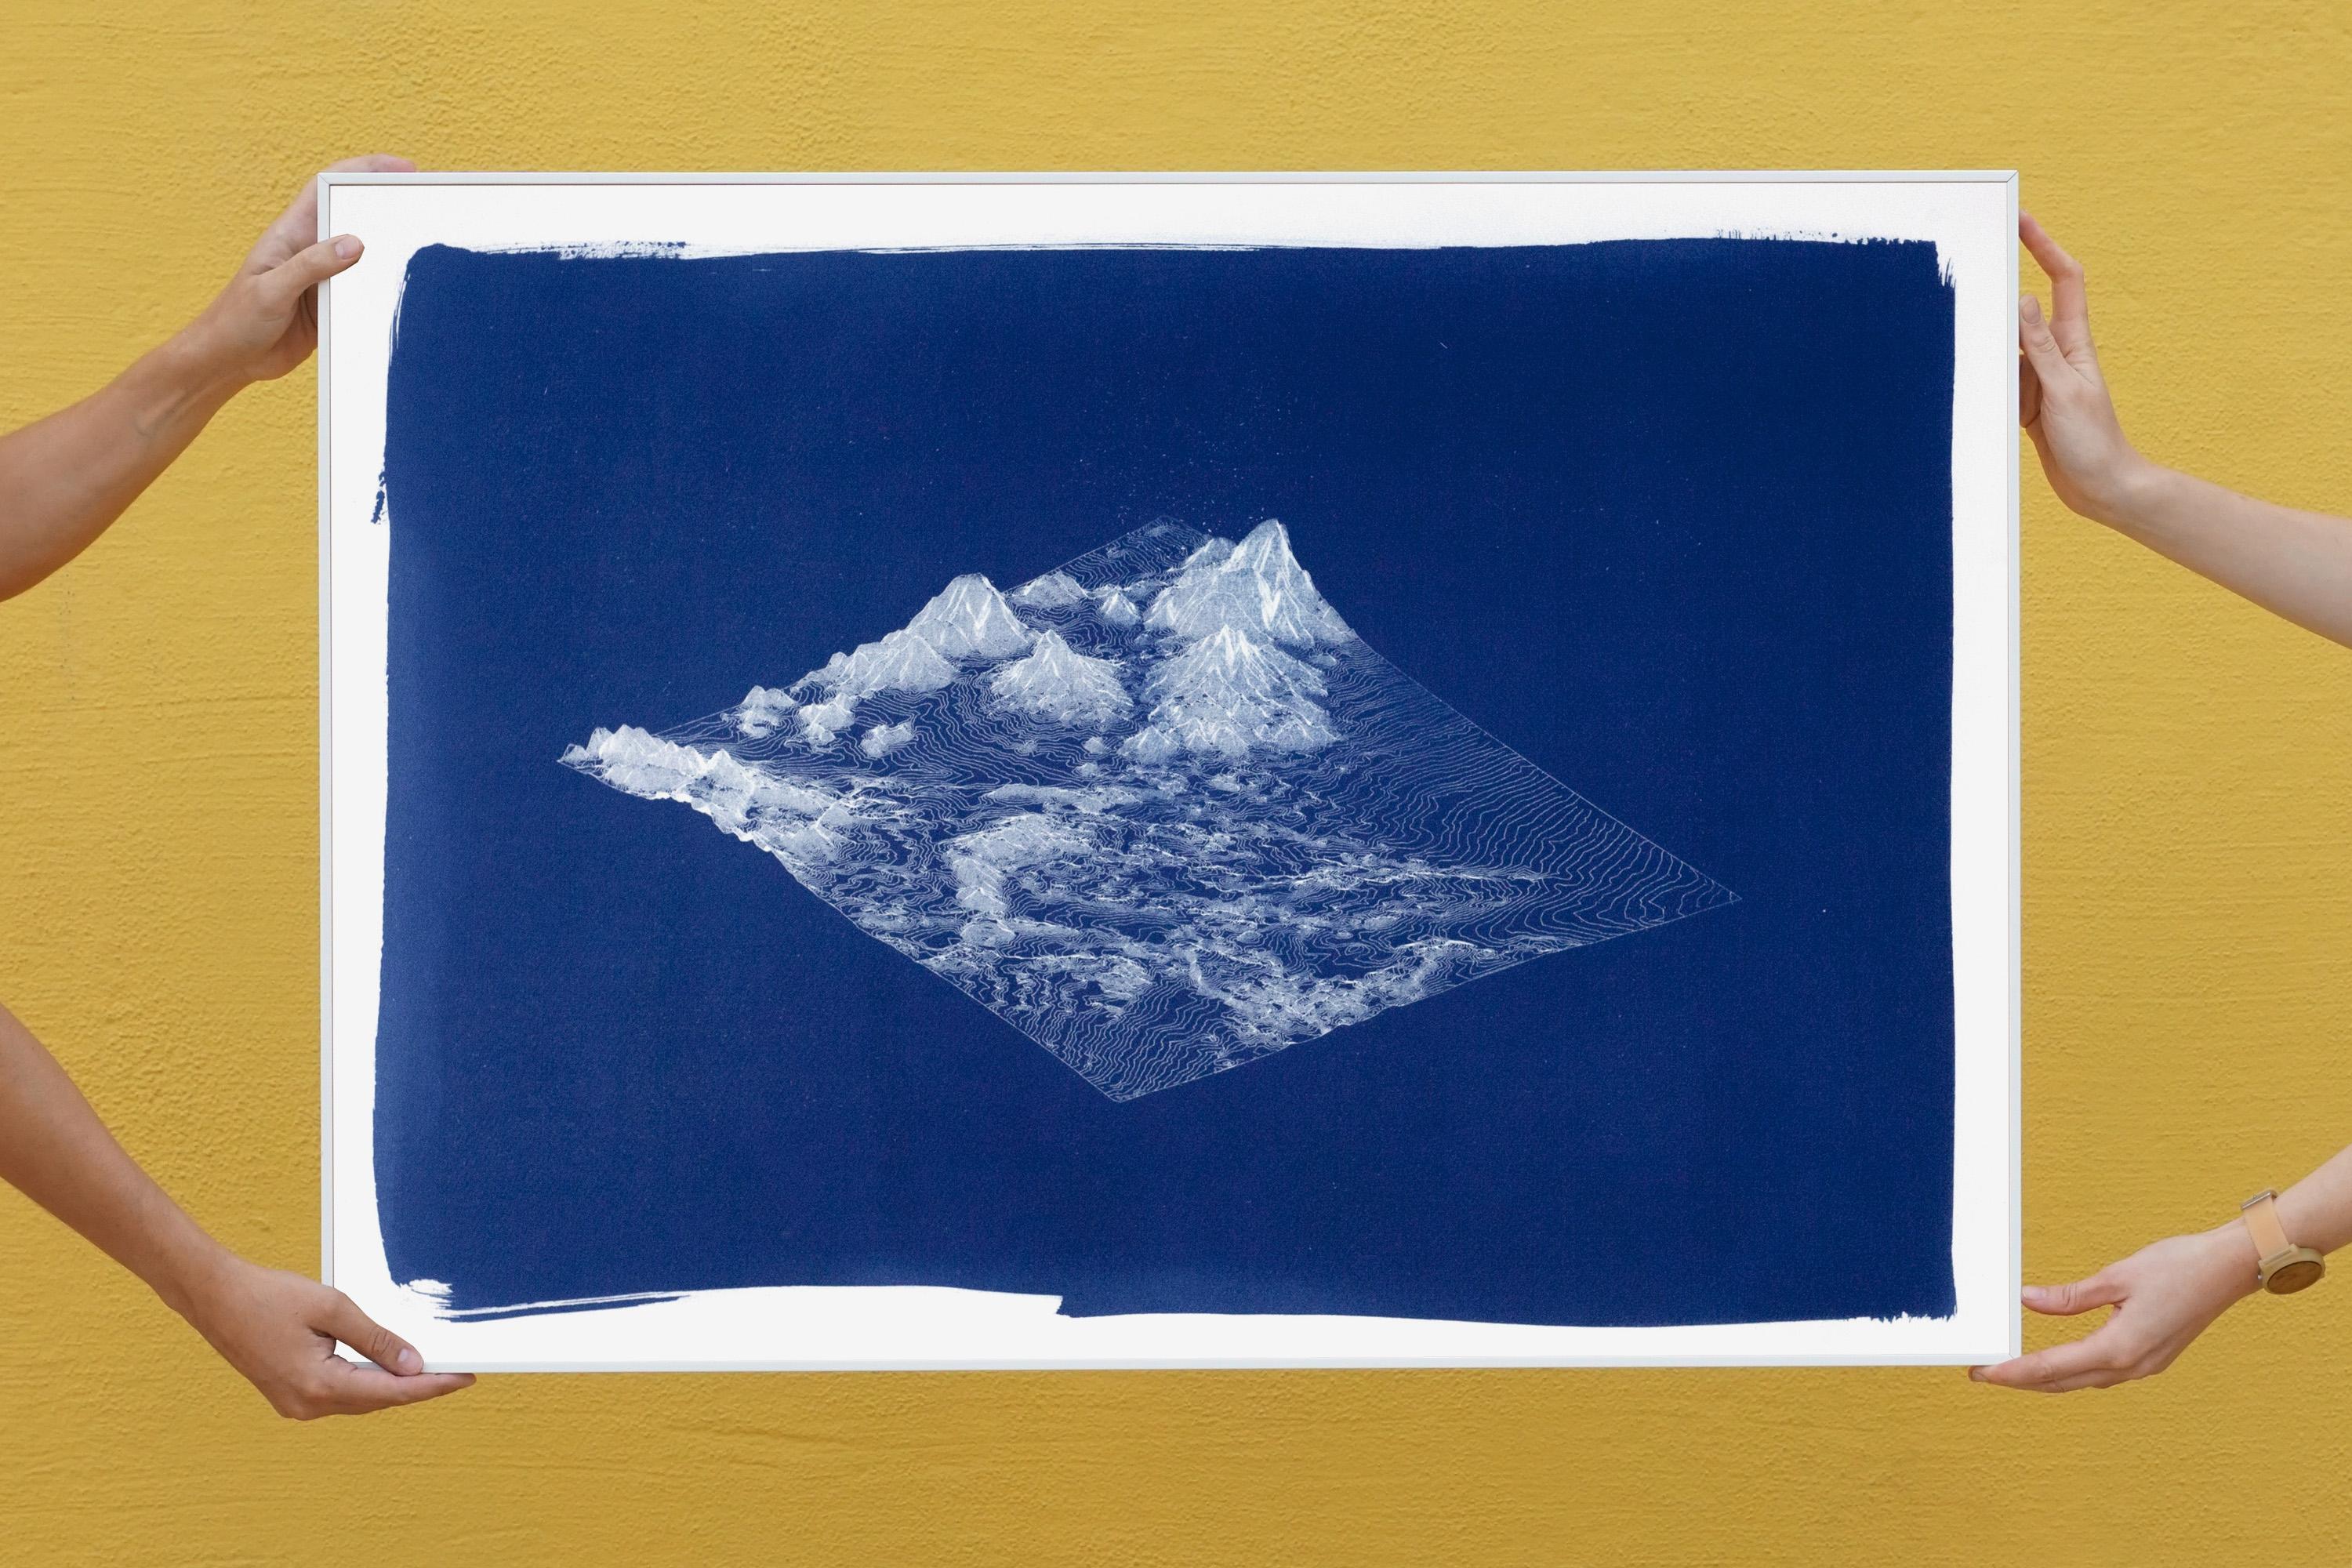 This is an exclusive handprinted limited edition cyanotype.
Contemporary linear cyanotype showing a 3D mountain terrain.

Details:
+ Title: 3D Render Mountain
+ Year: 2021
+ Edition Size: 50
+ Stamped and Certificate of Authenticity provided
+